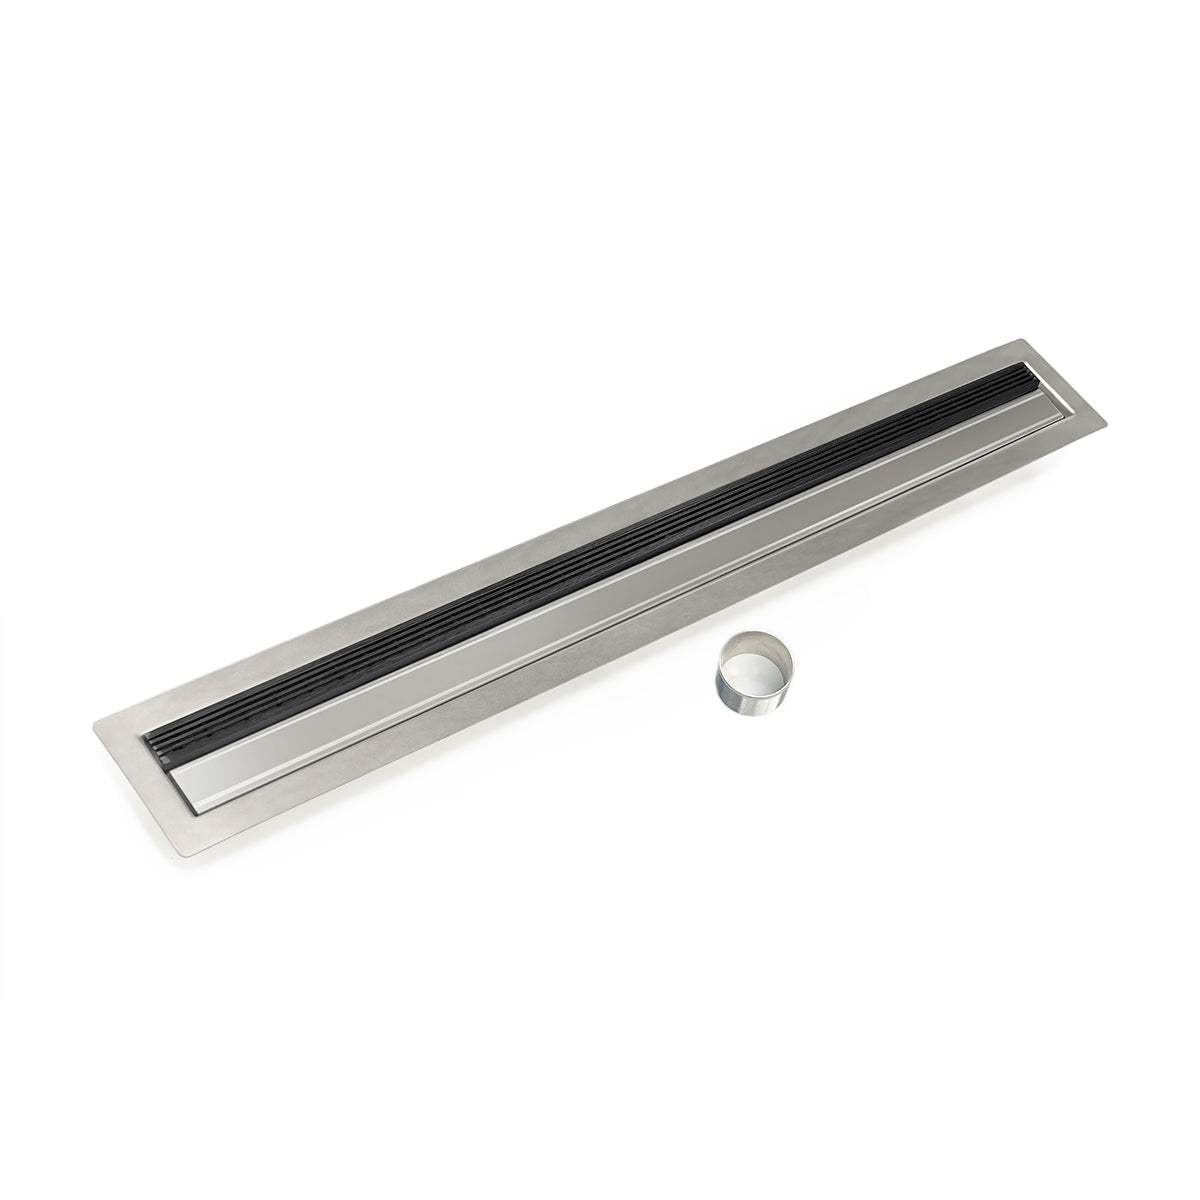 Infinity Drain 32" FCB Series Double Waterproofing Linear Drain Kit with 1" Wedge Wire Grate